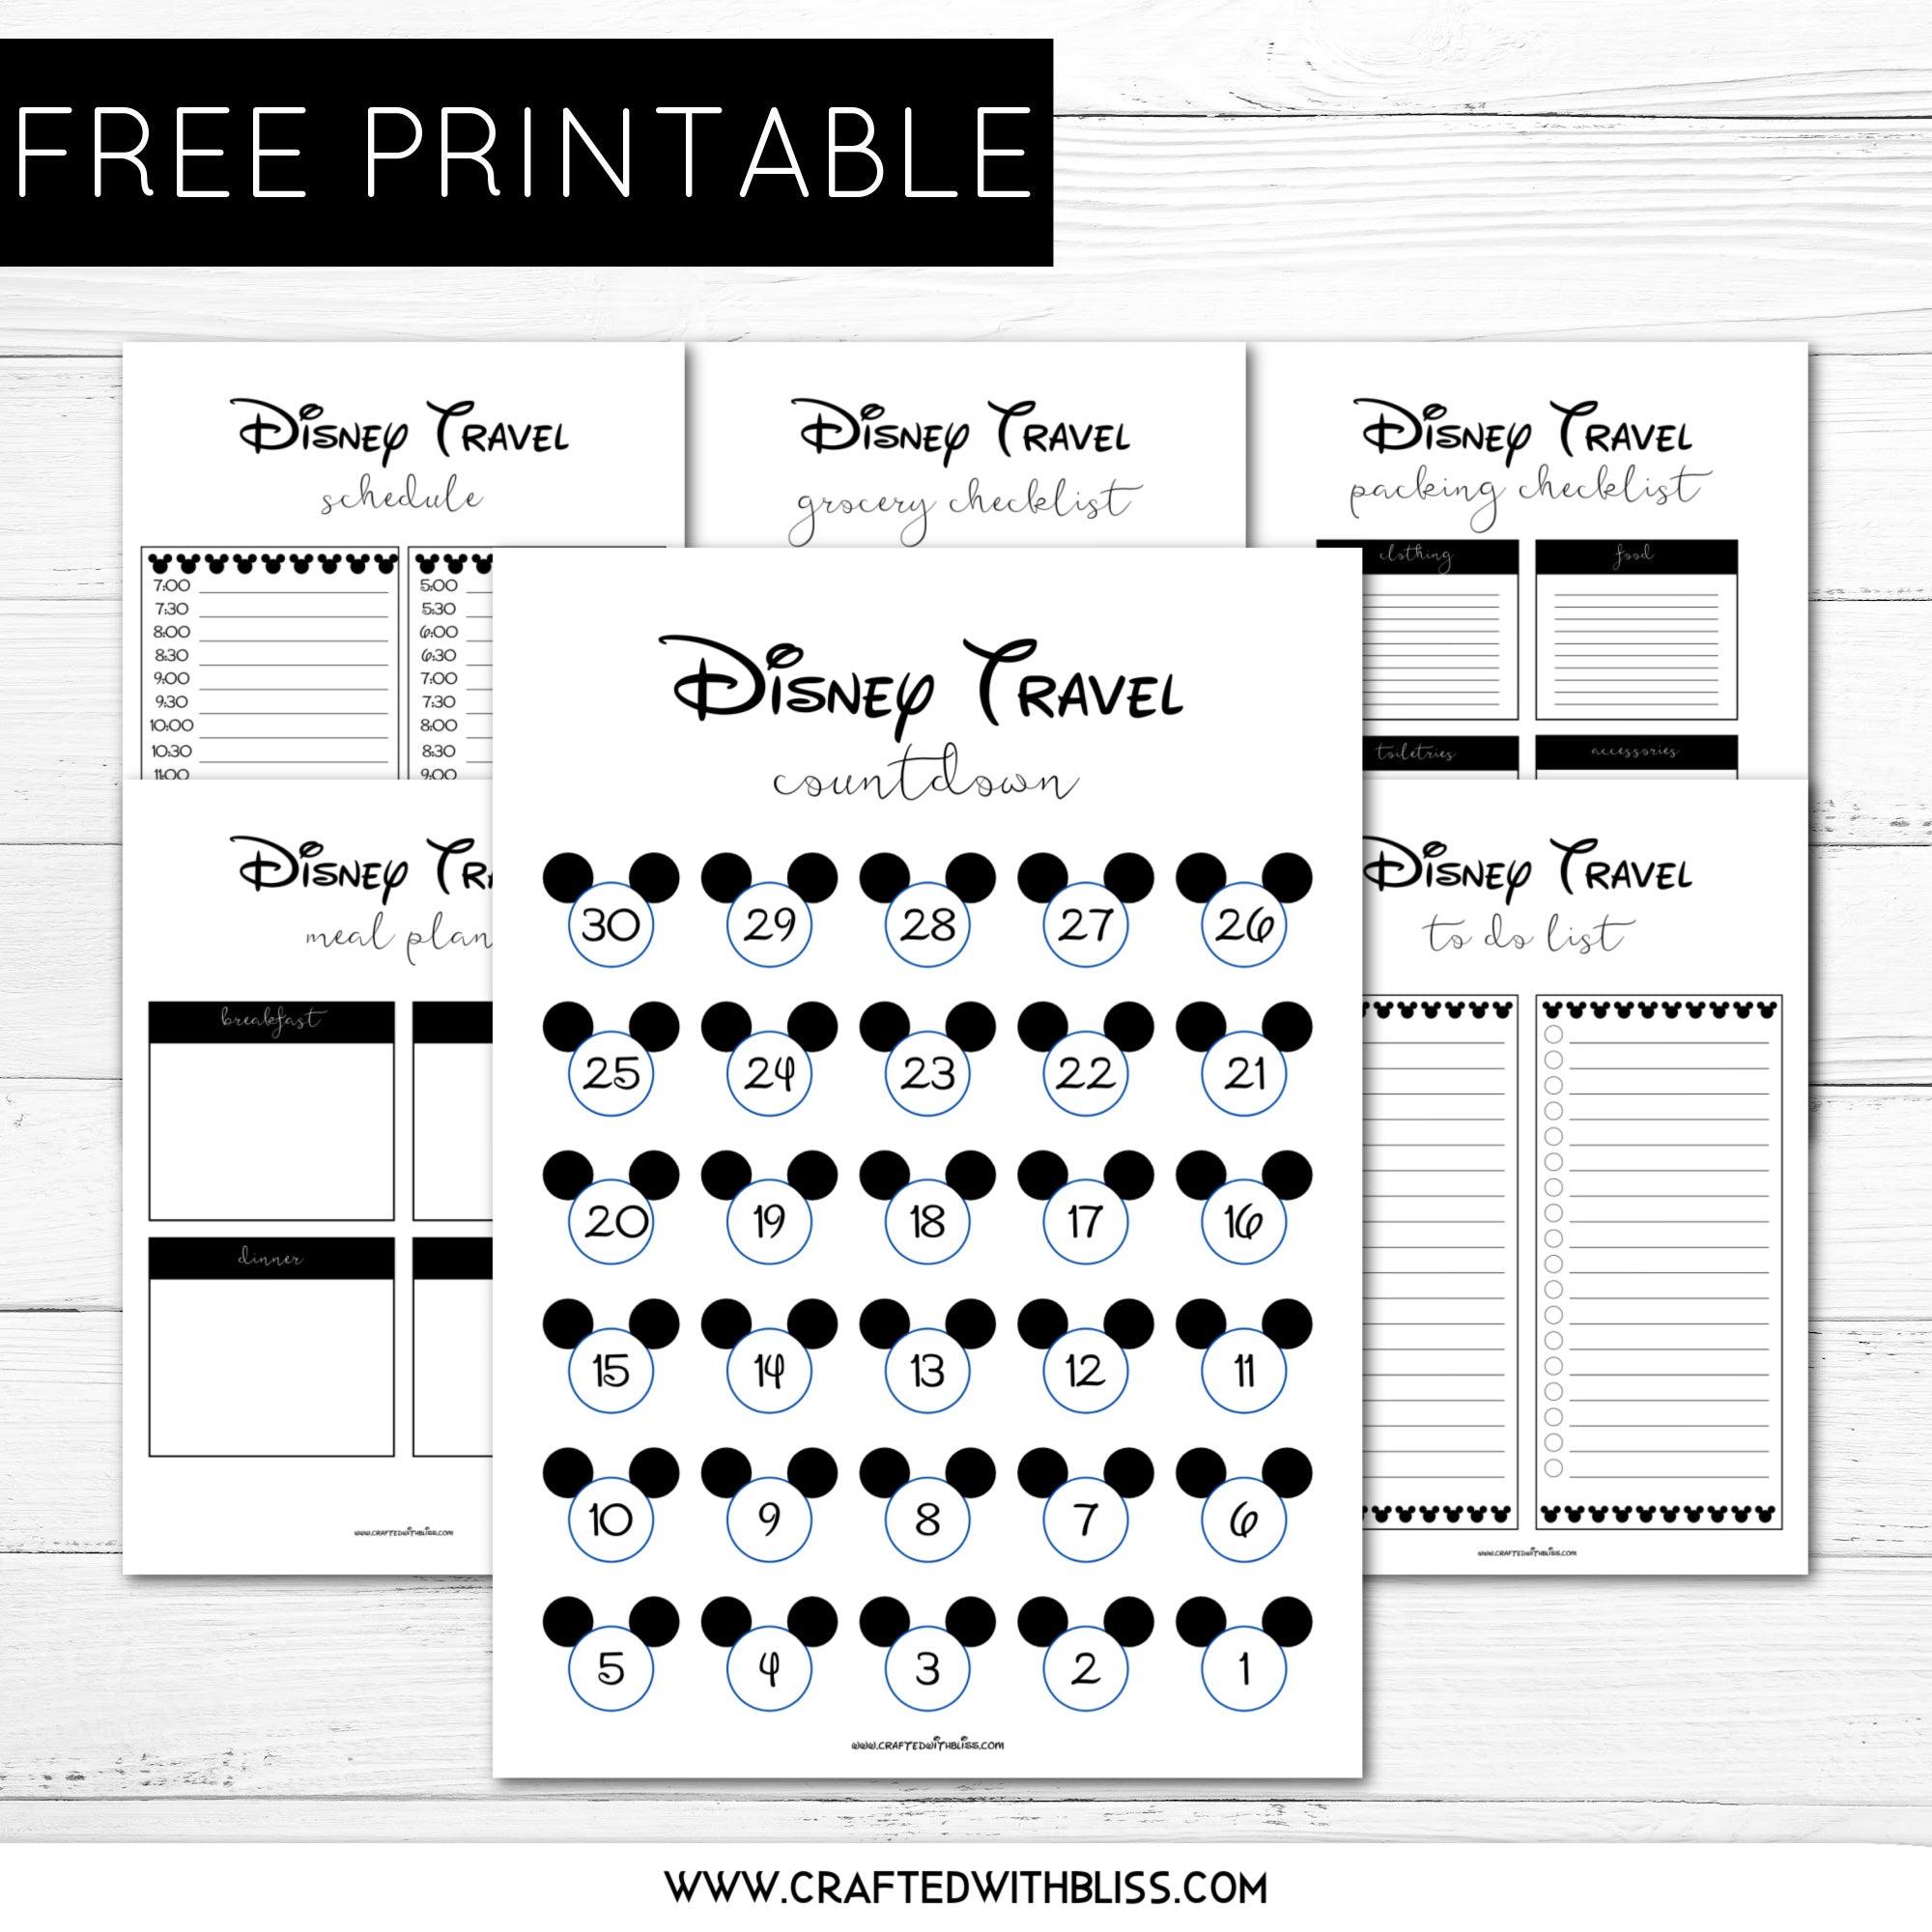 free-disney-planner-printable-craftedwithbliss